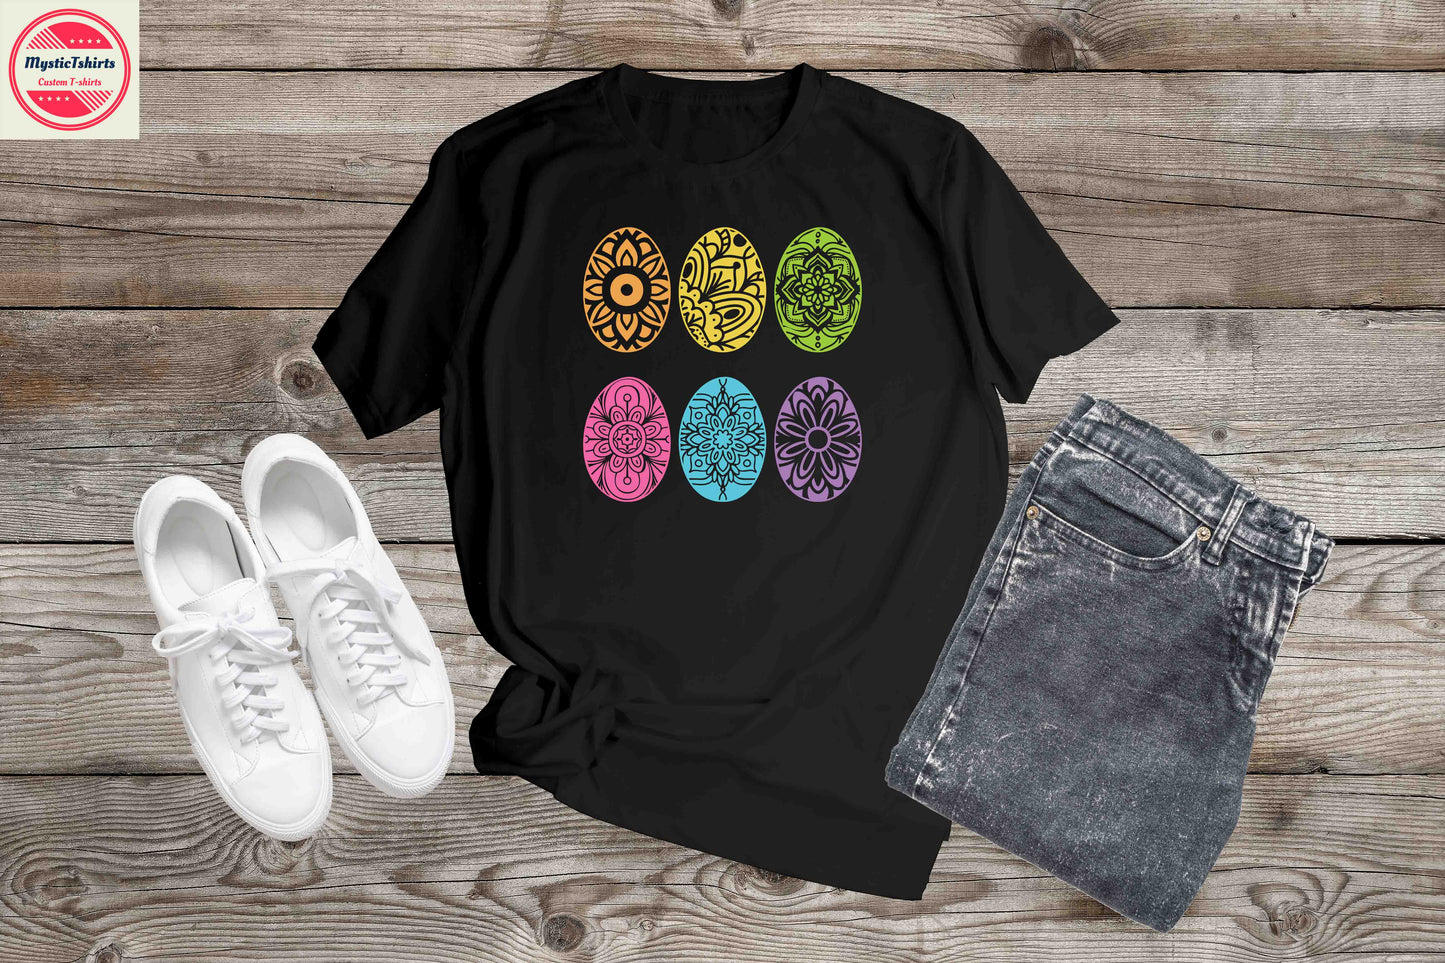 061. COLORED EGGS, Custom Made Shirt, Personalized T-Shirt, Custom Text, Make Your Own Shirt, Custom Tee